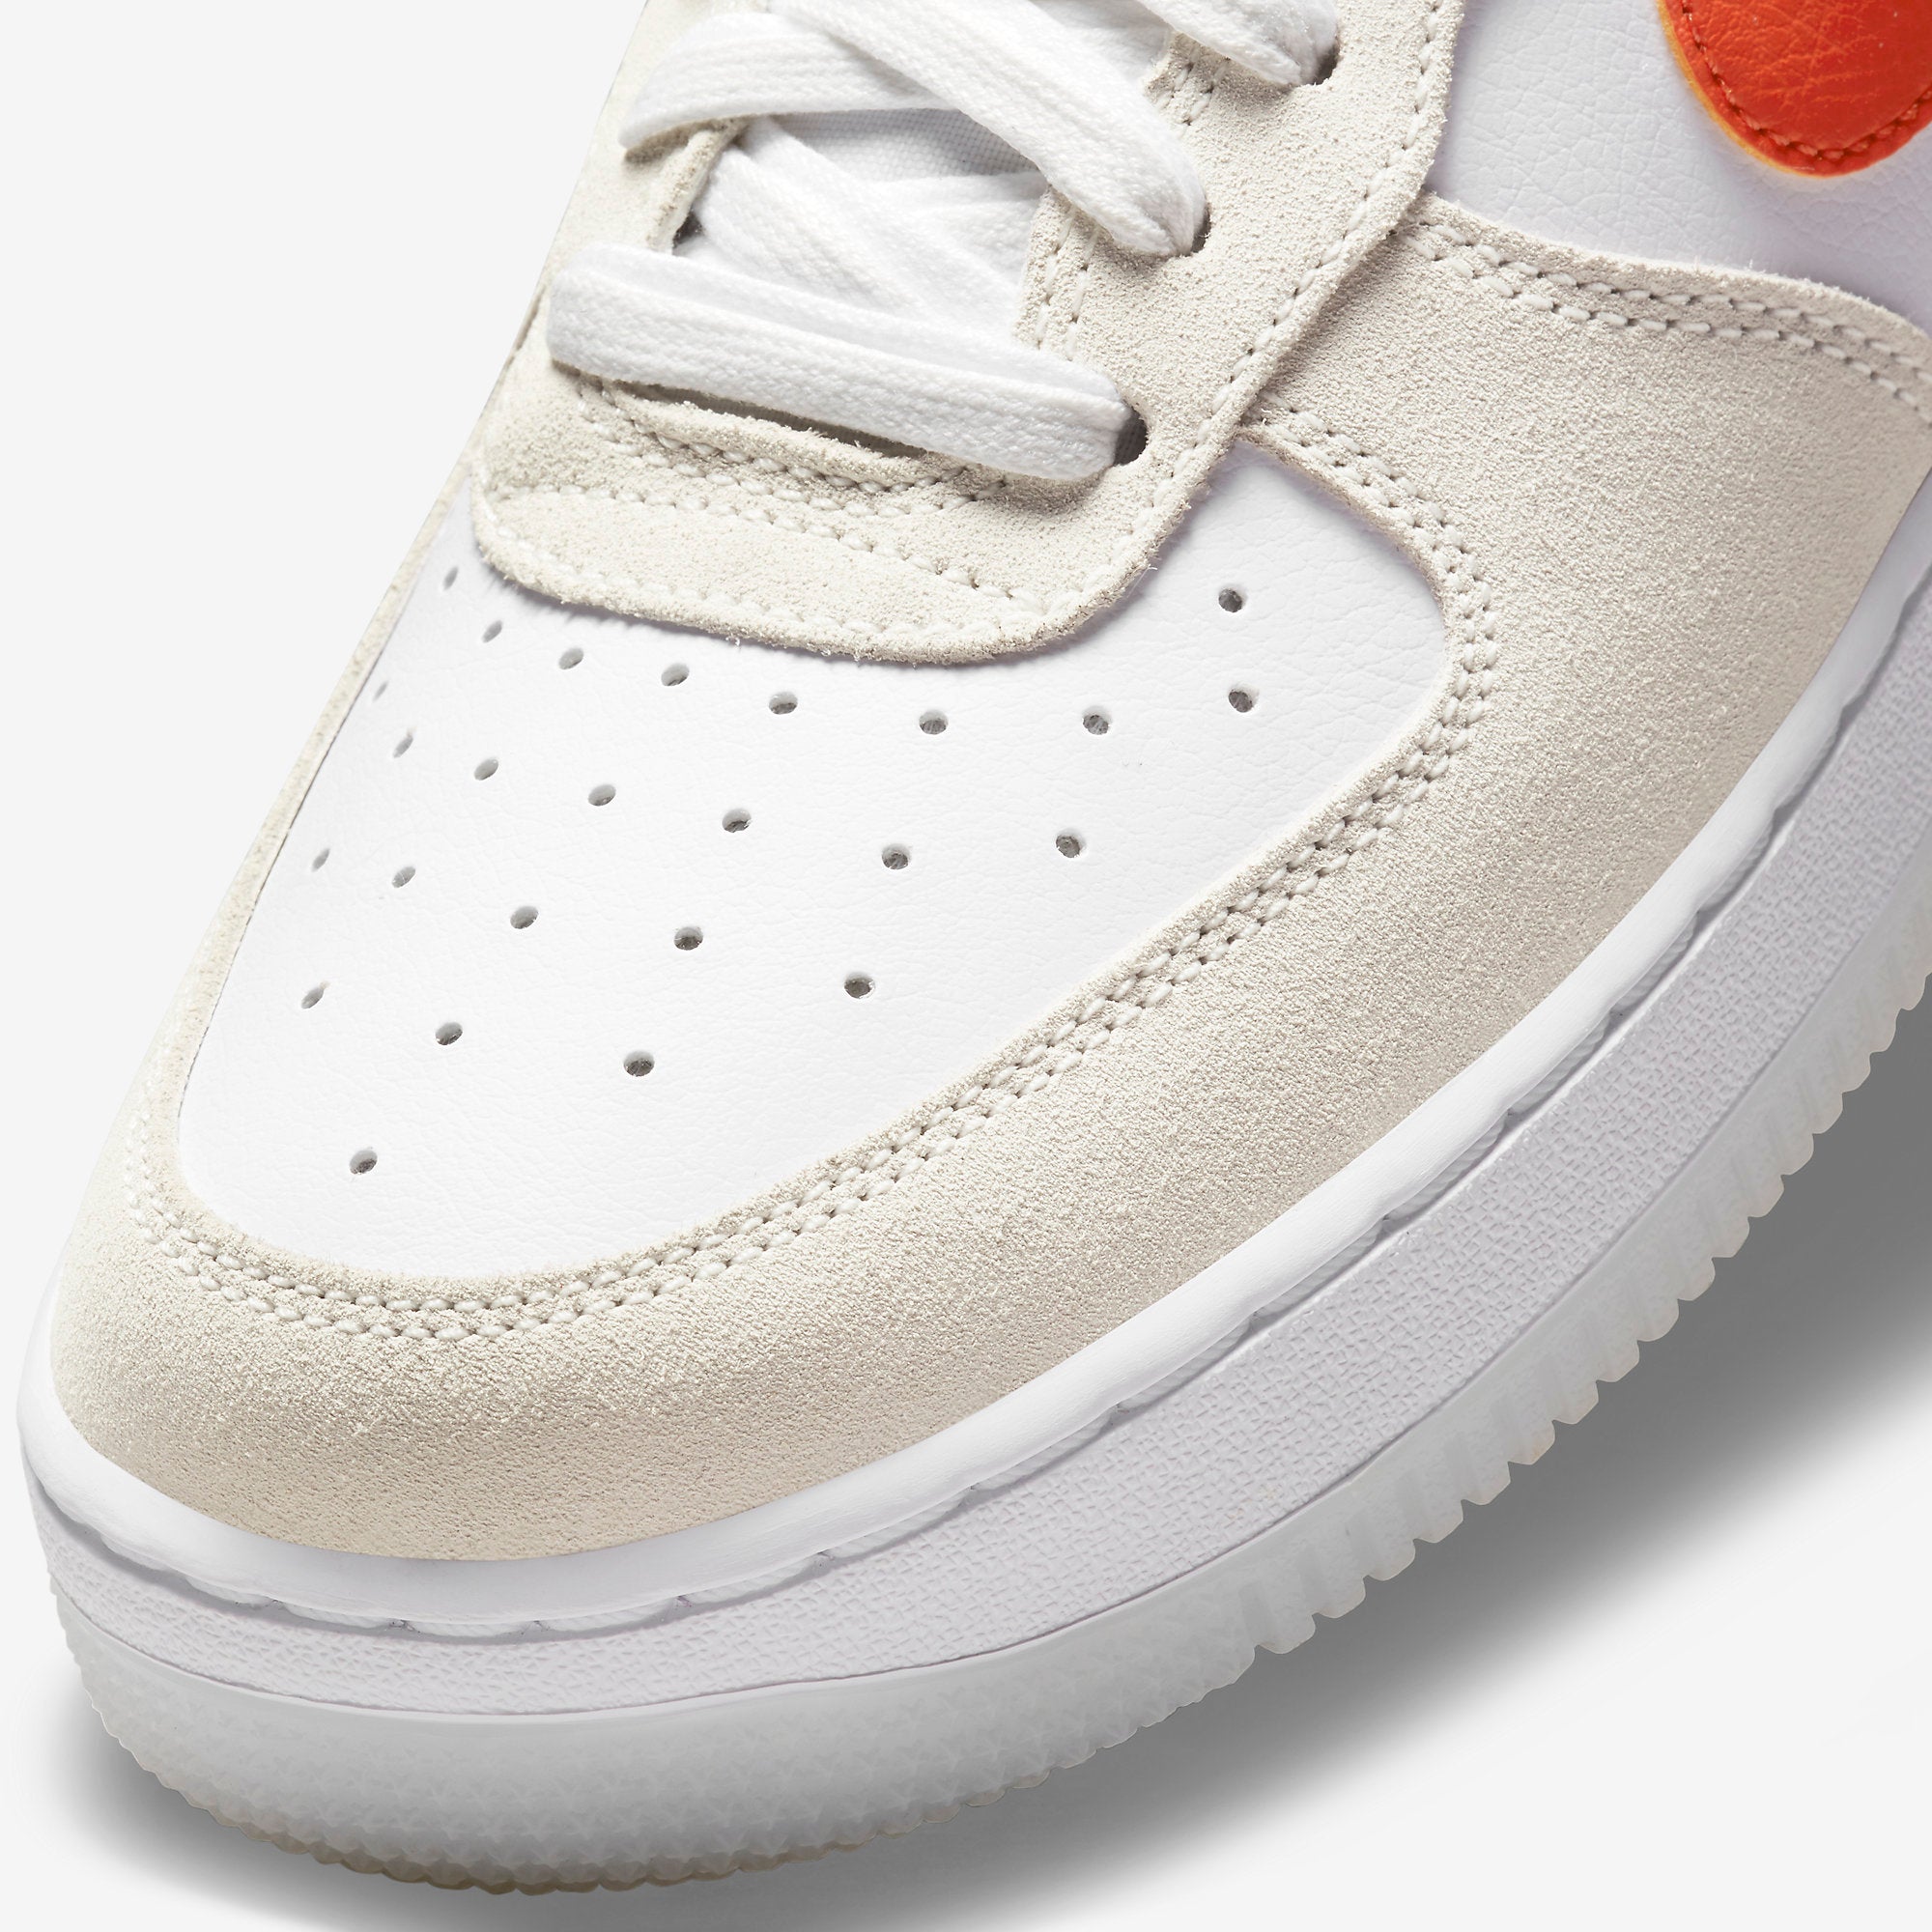 Nike Air Force 1 Low First Use Orange Cream shoes 